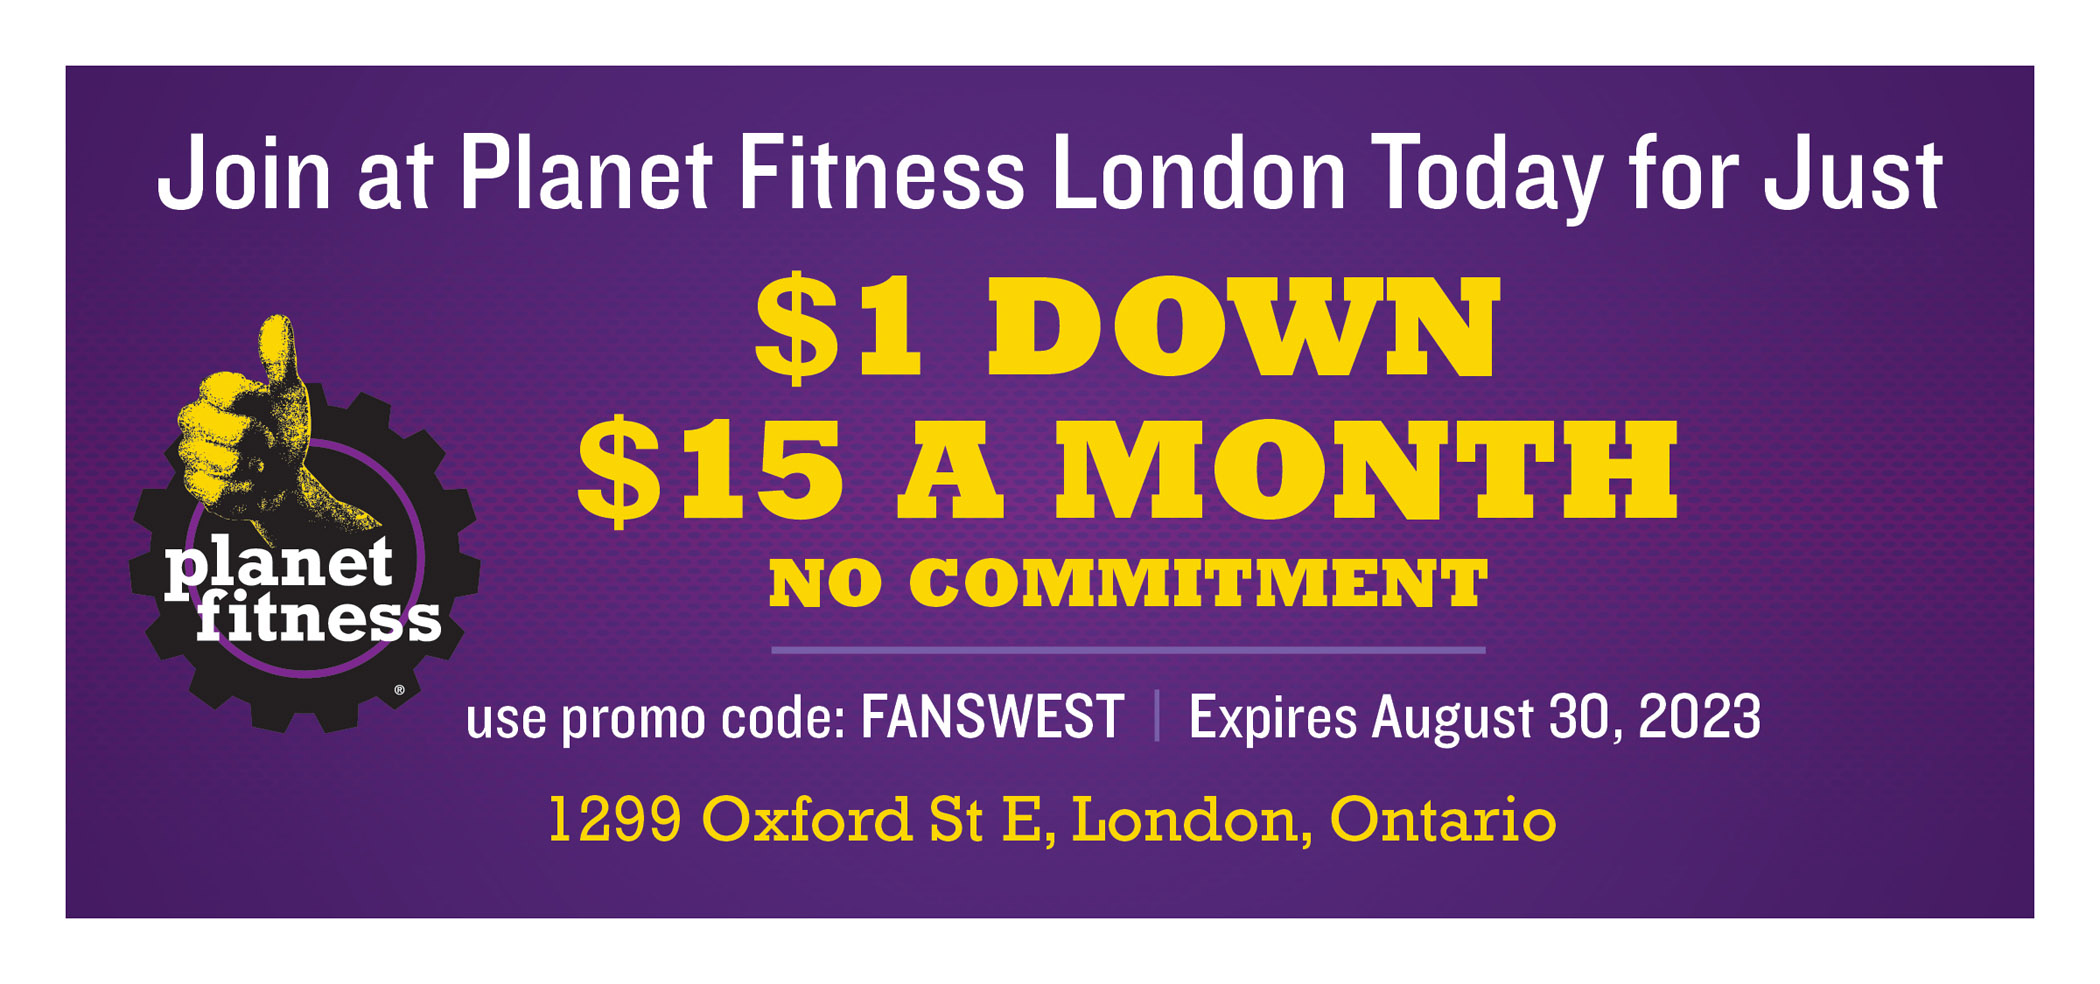 Join at Planet Fitness London today for just $1 down, $15 a month, no commitment